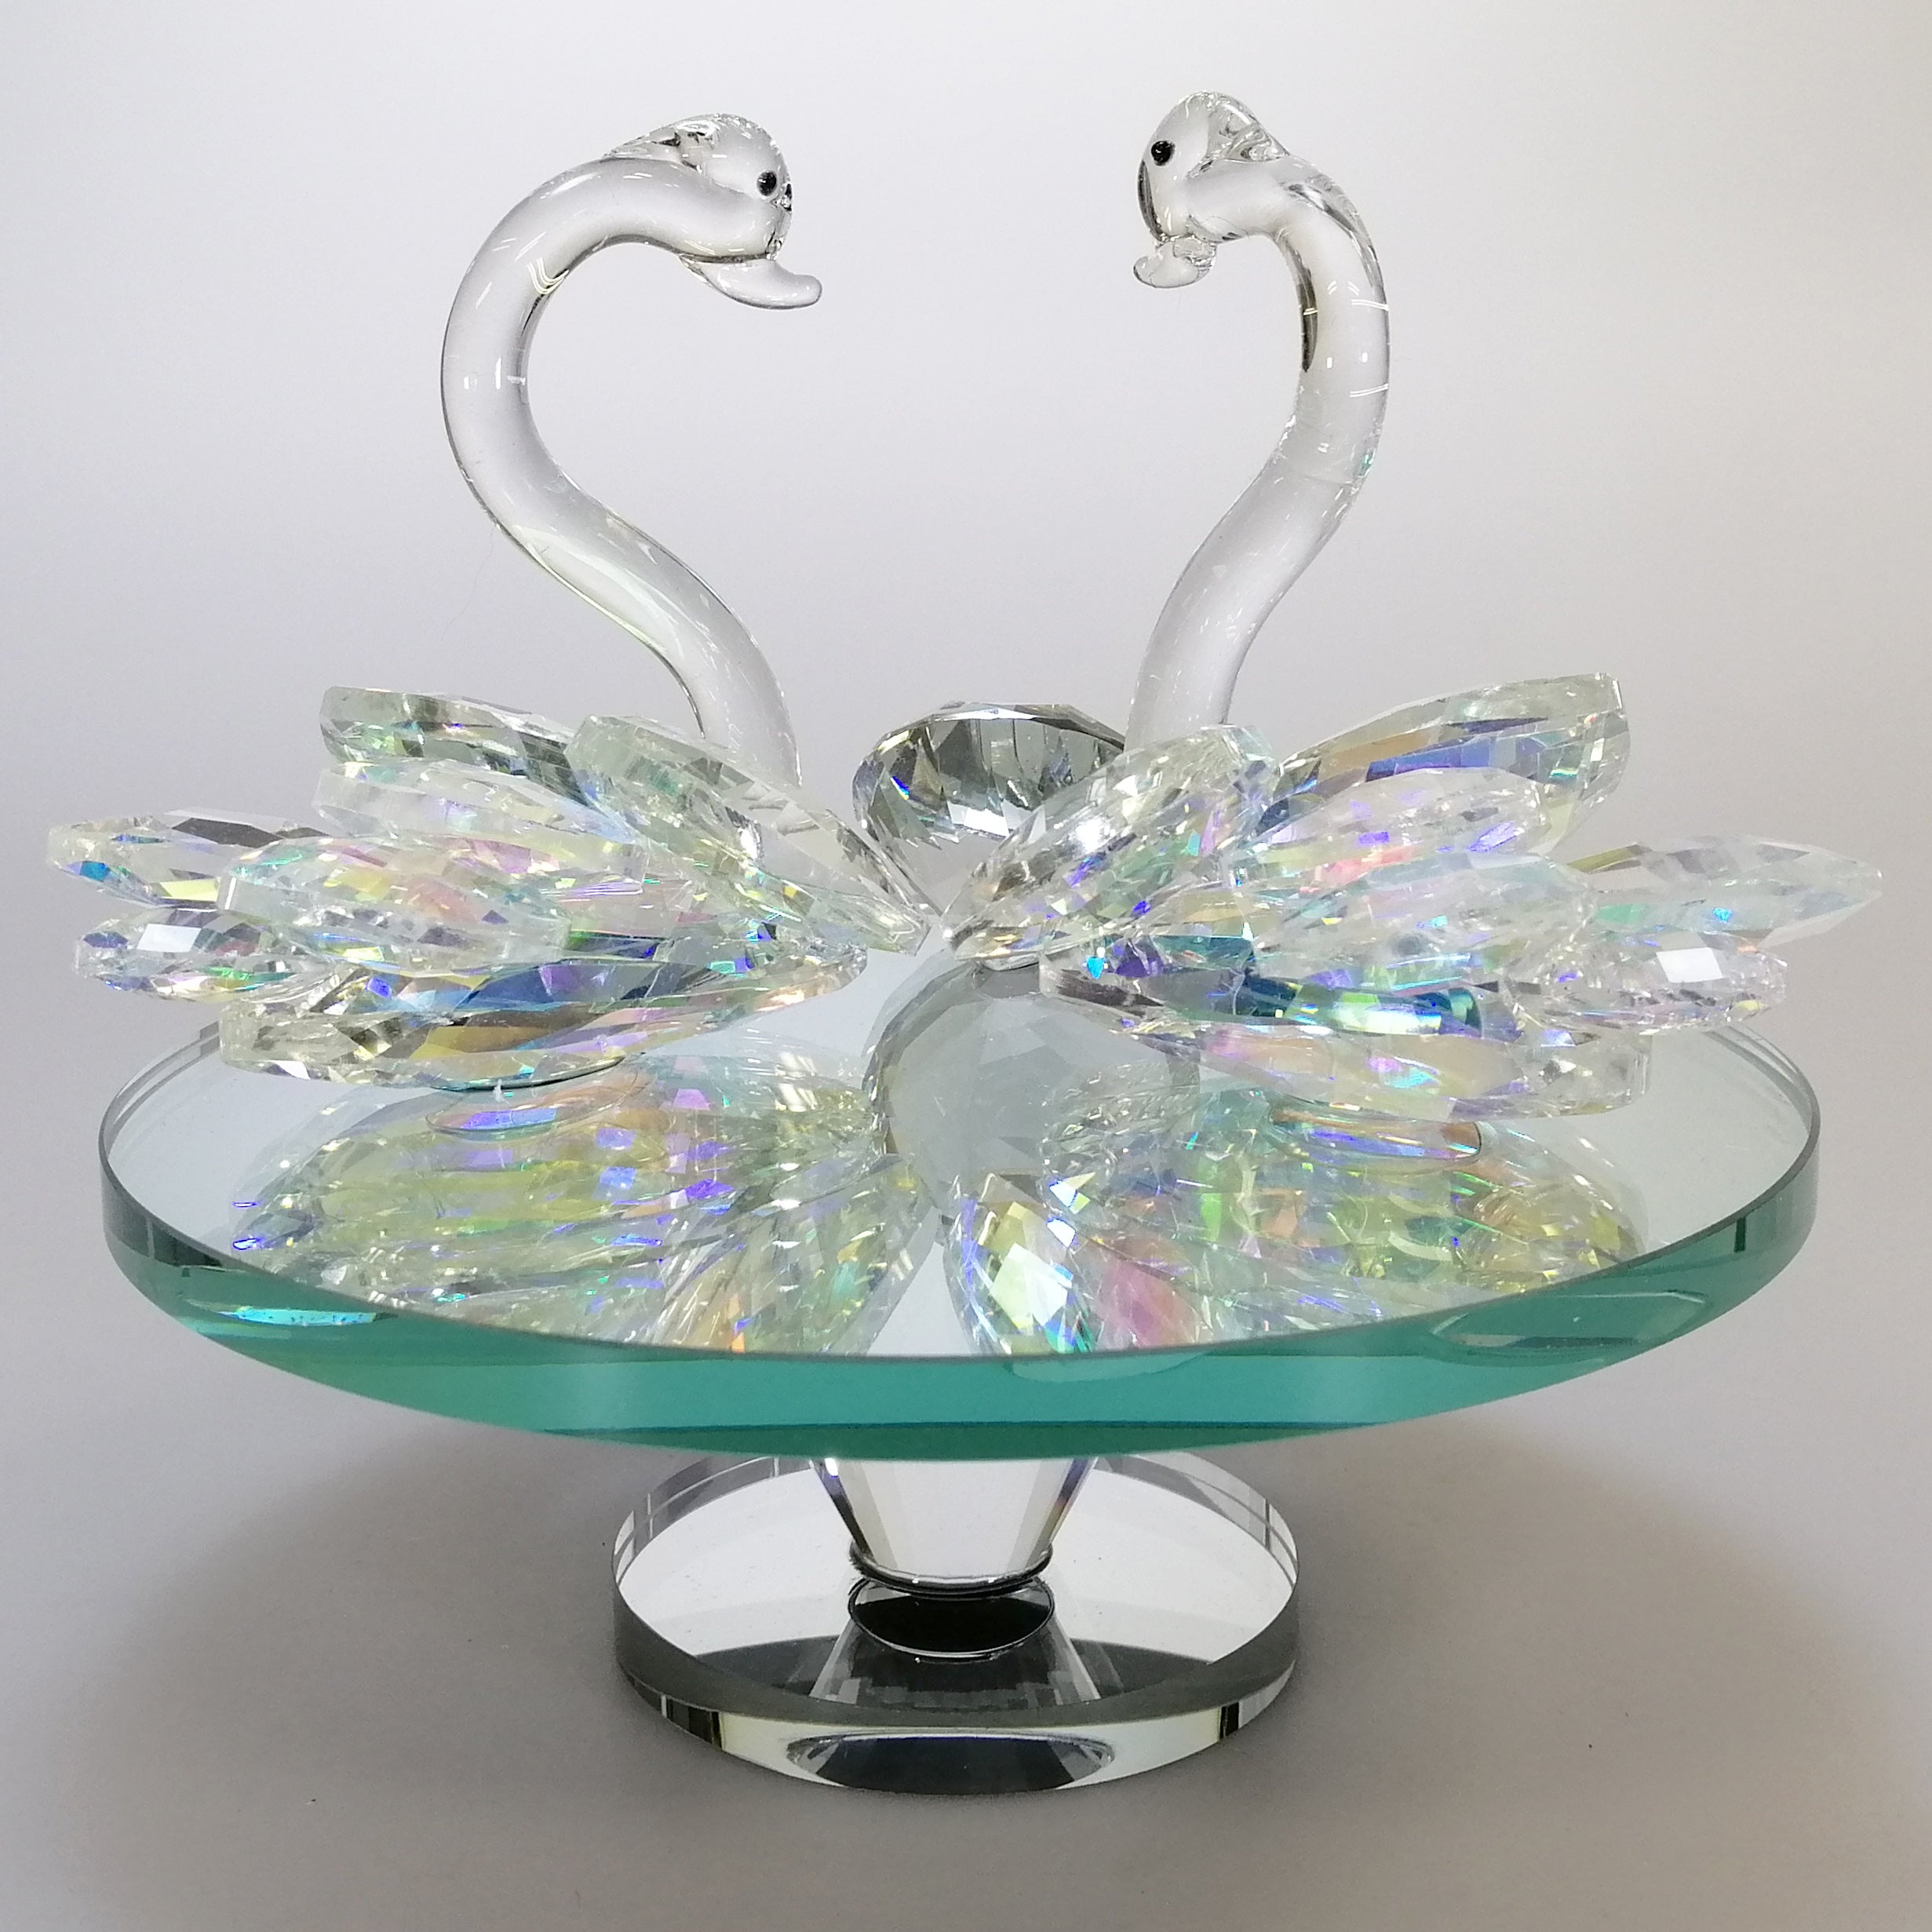 Iridescent Cut Glass Swans with Gem on Turnable Mirror Base